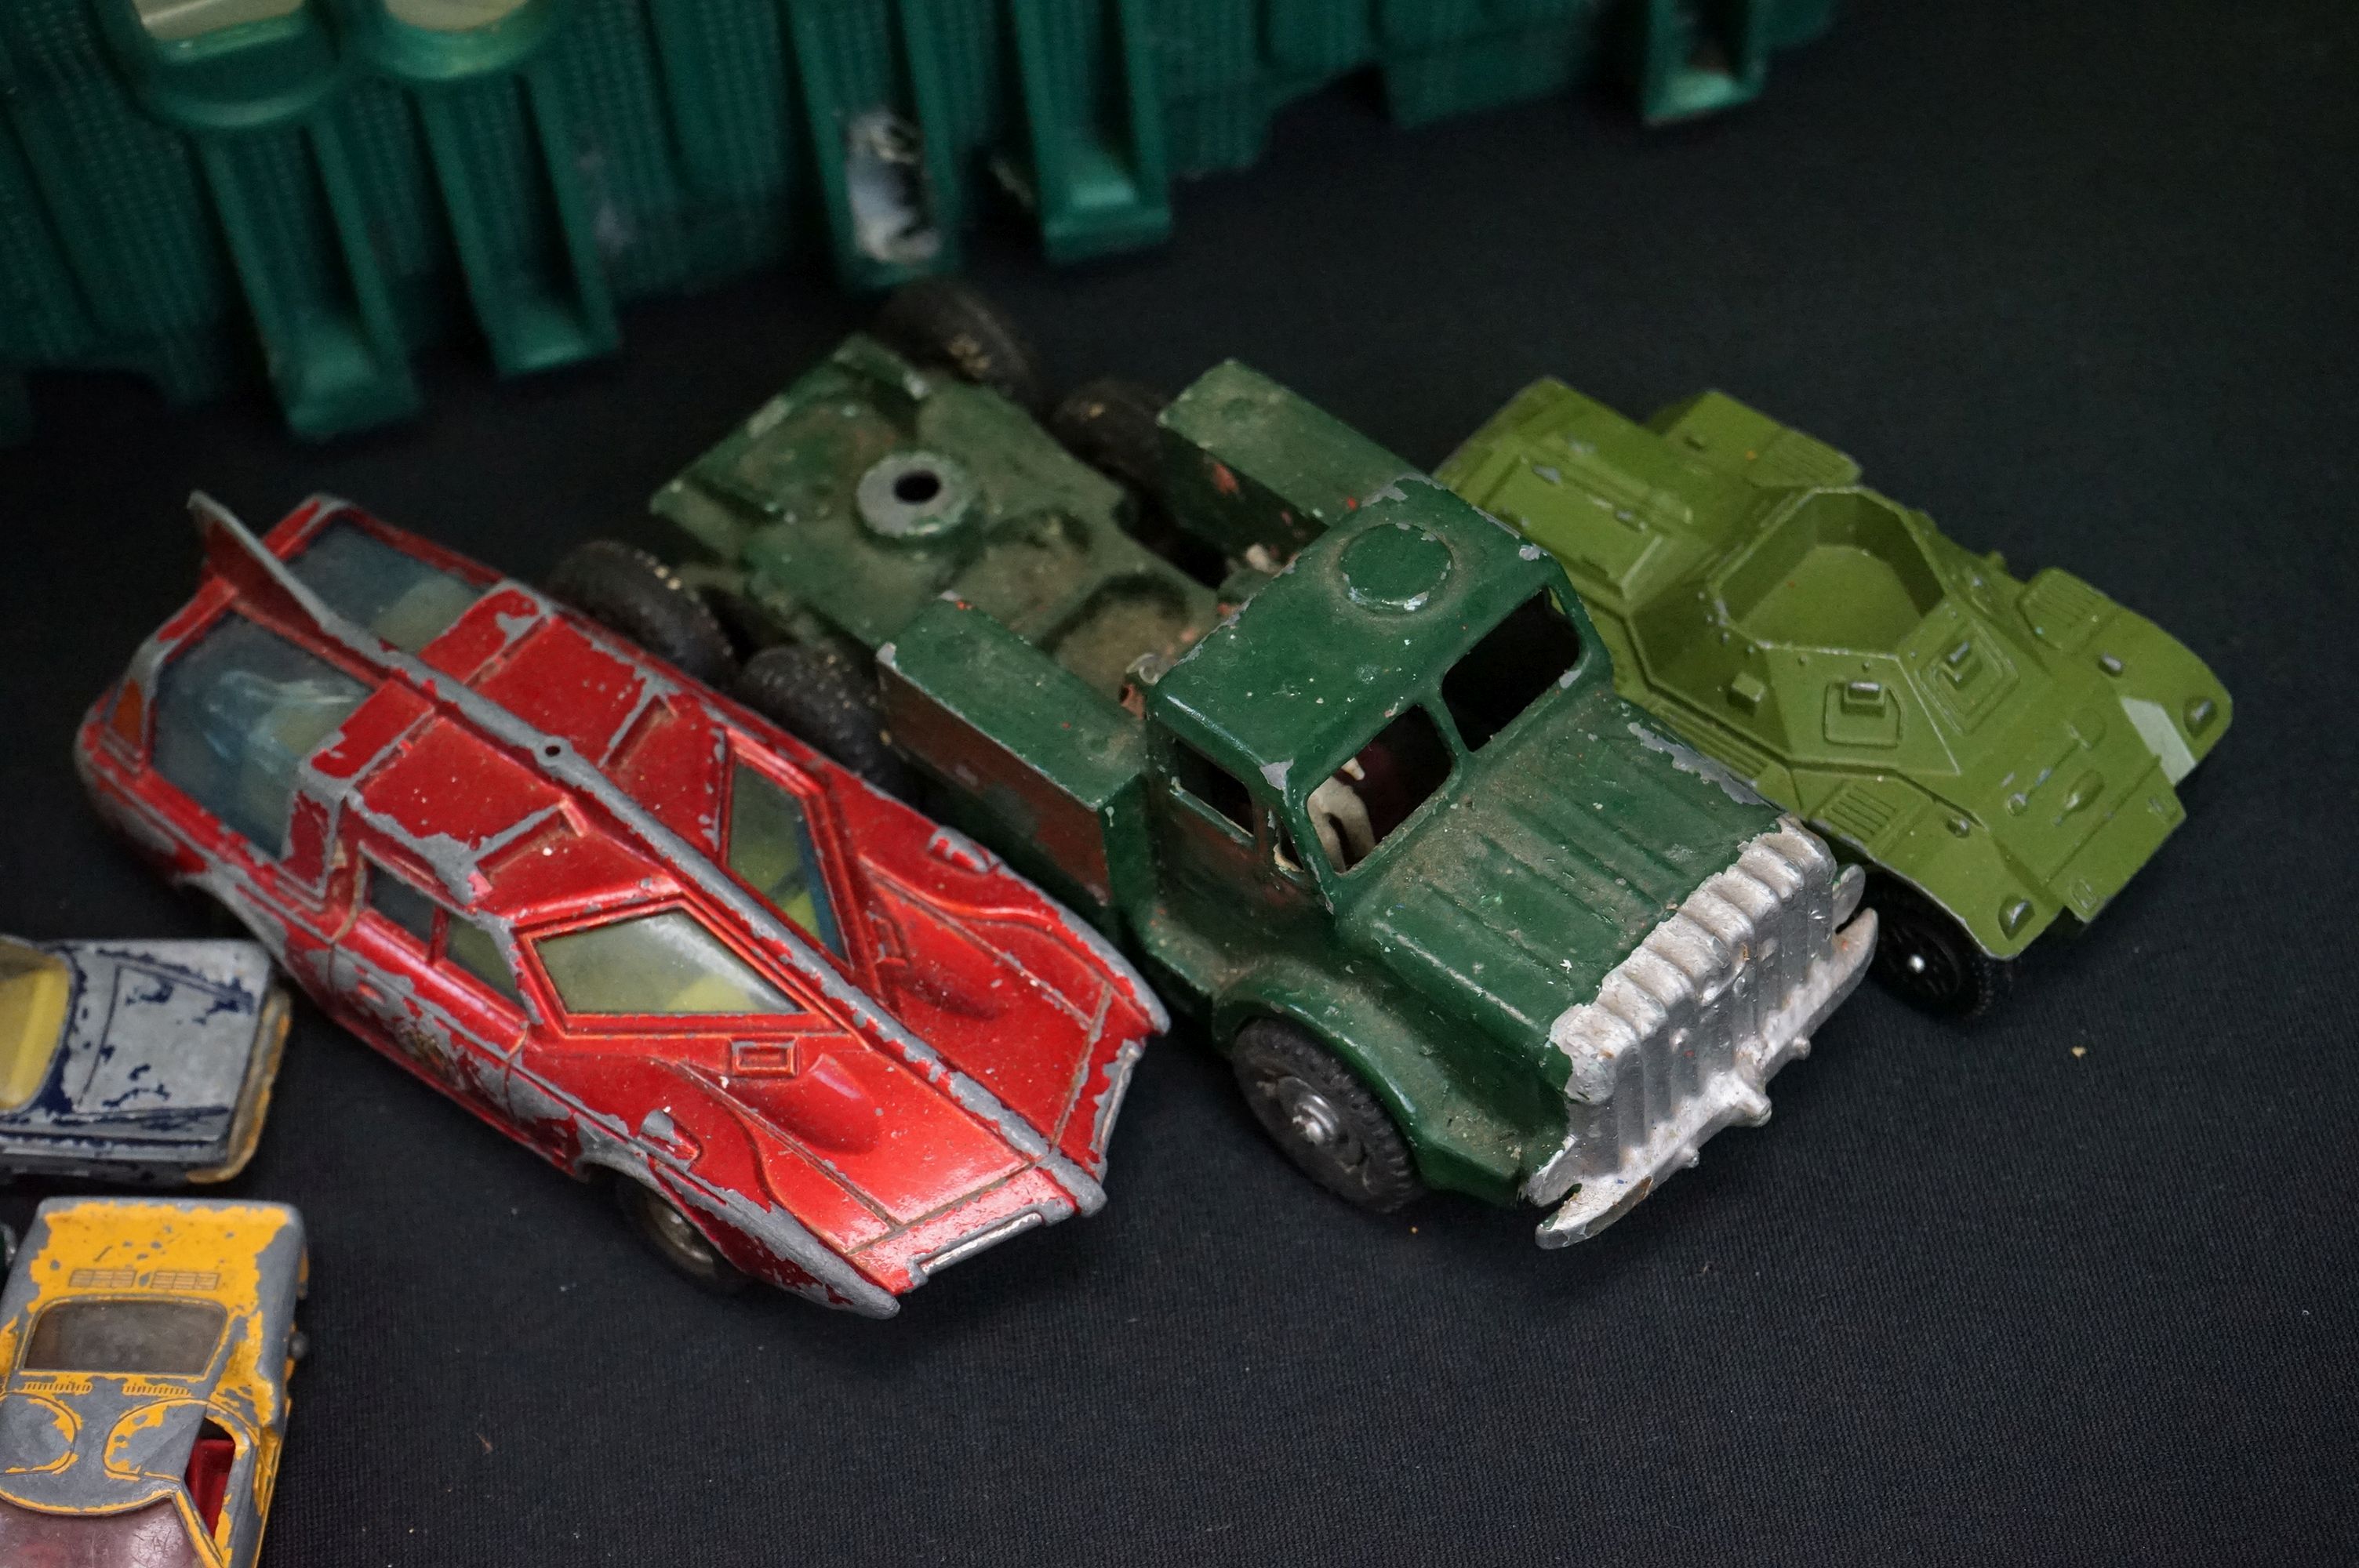 Over 35 Mid 20th C onwards play worn diecast models to include Dinky, Corgi, Matchbox and Lone Star, - Image 12 of 15